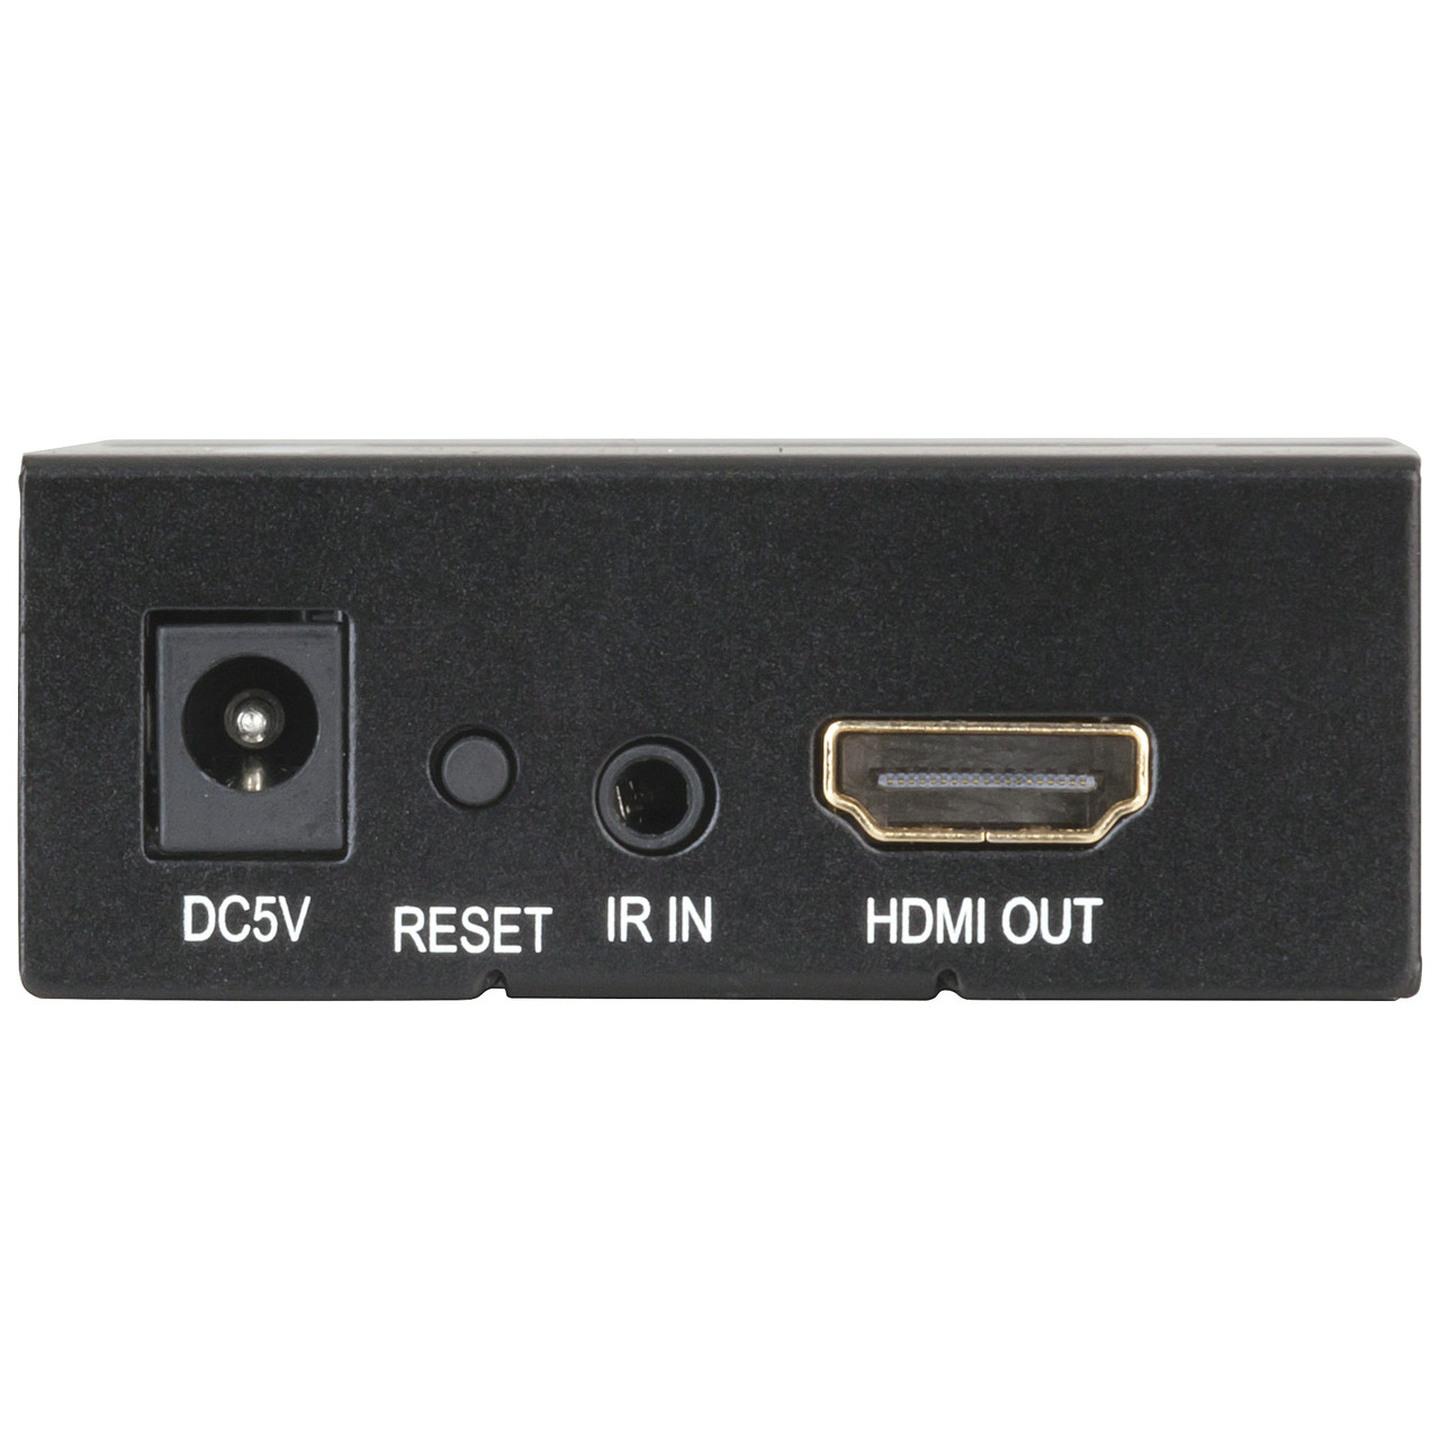 Spare TCP/IP HDMI Extender Receiver for AC-1734 TCP/IP HDMI Extender